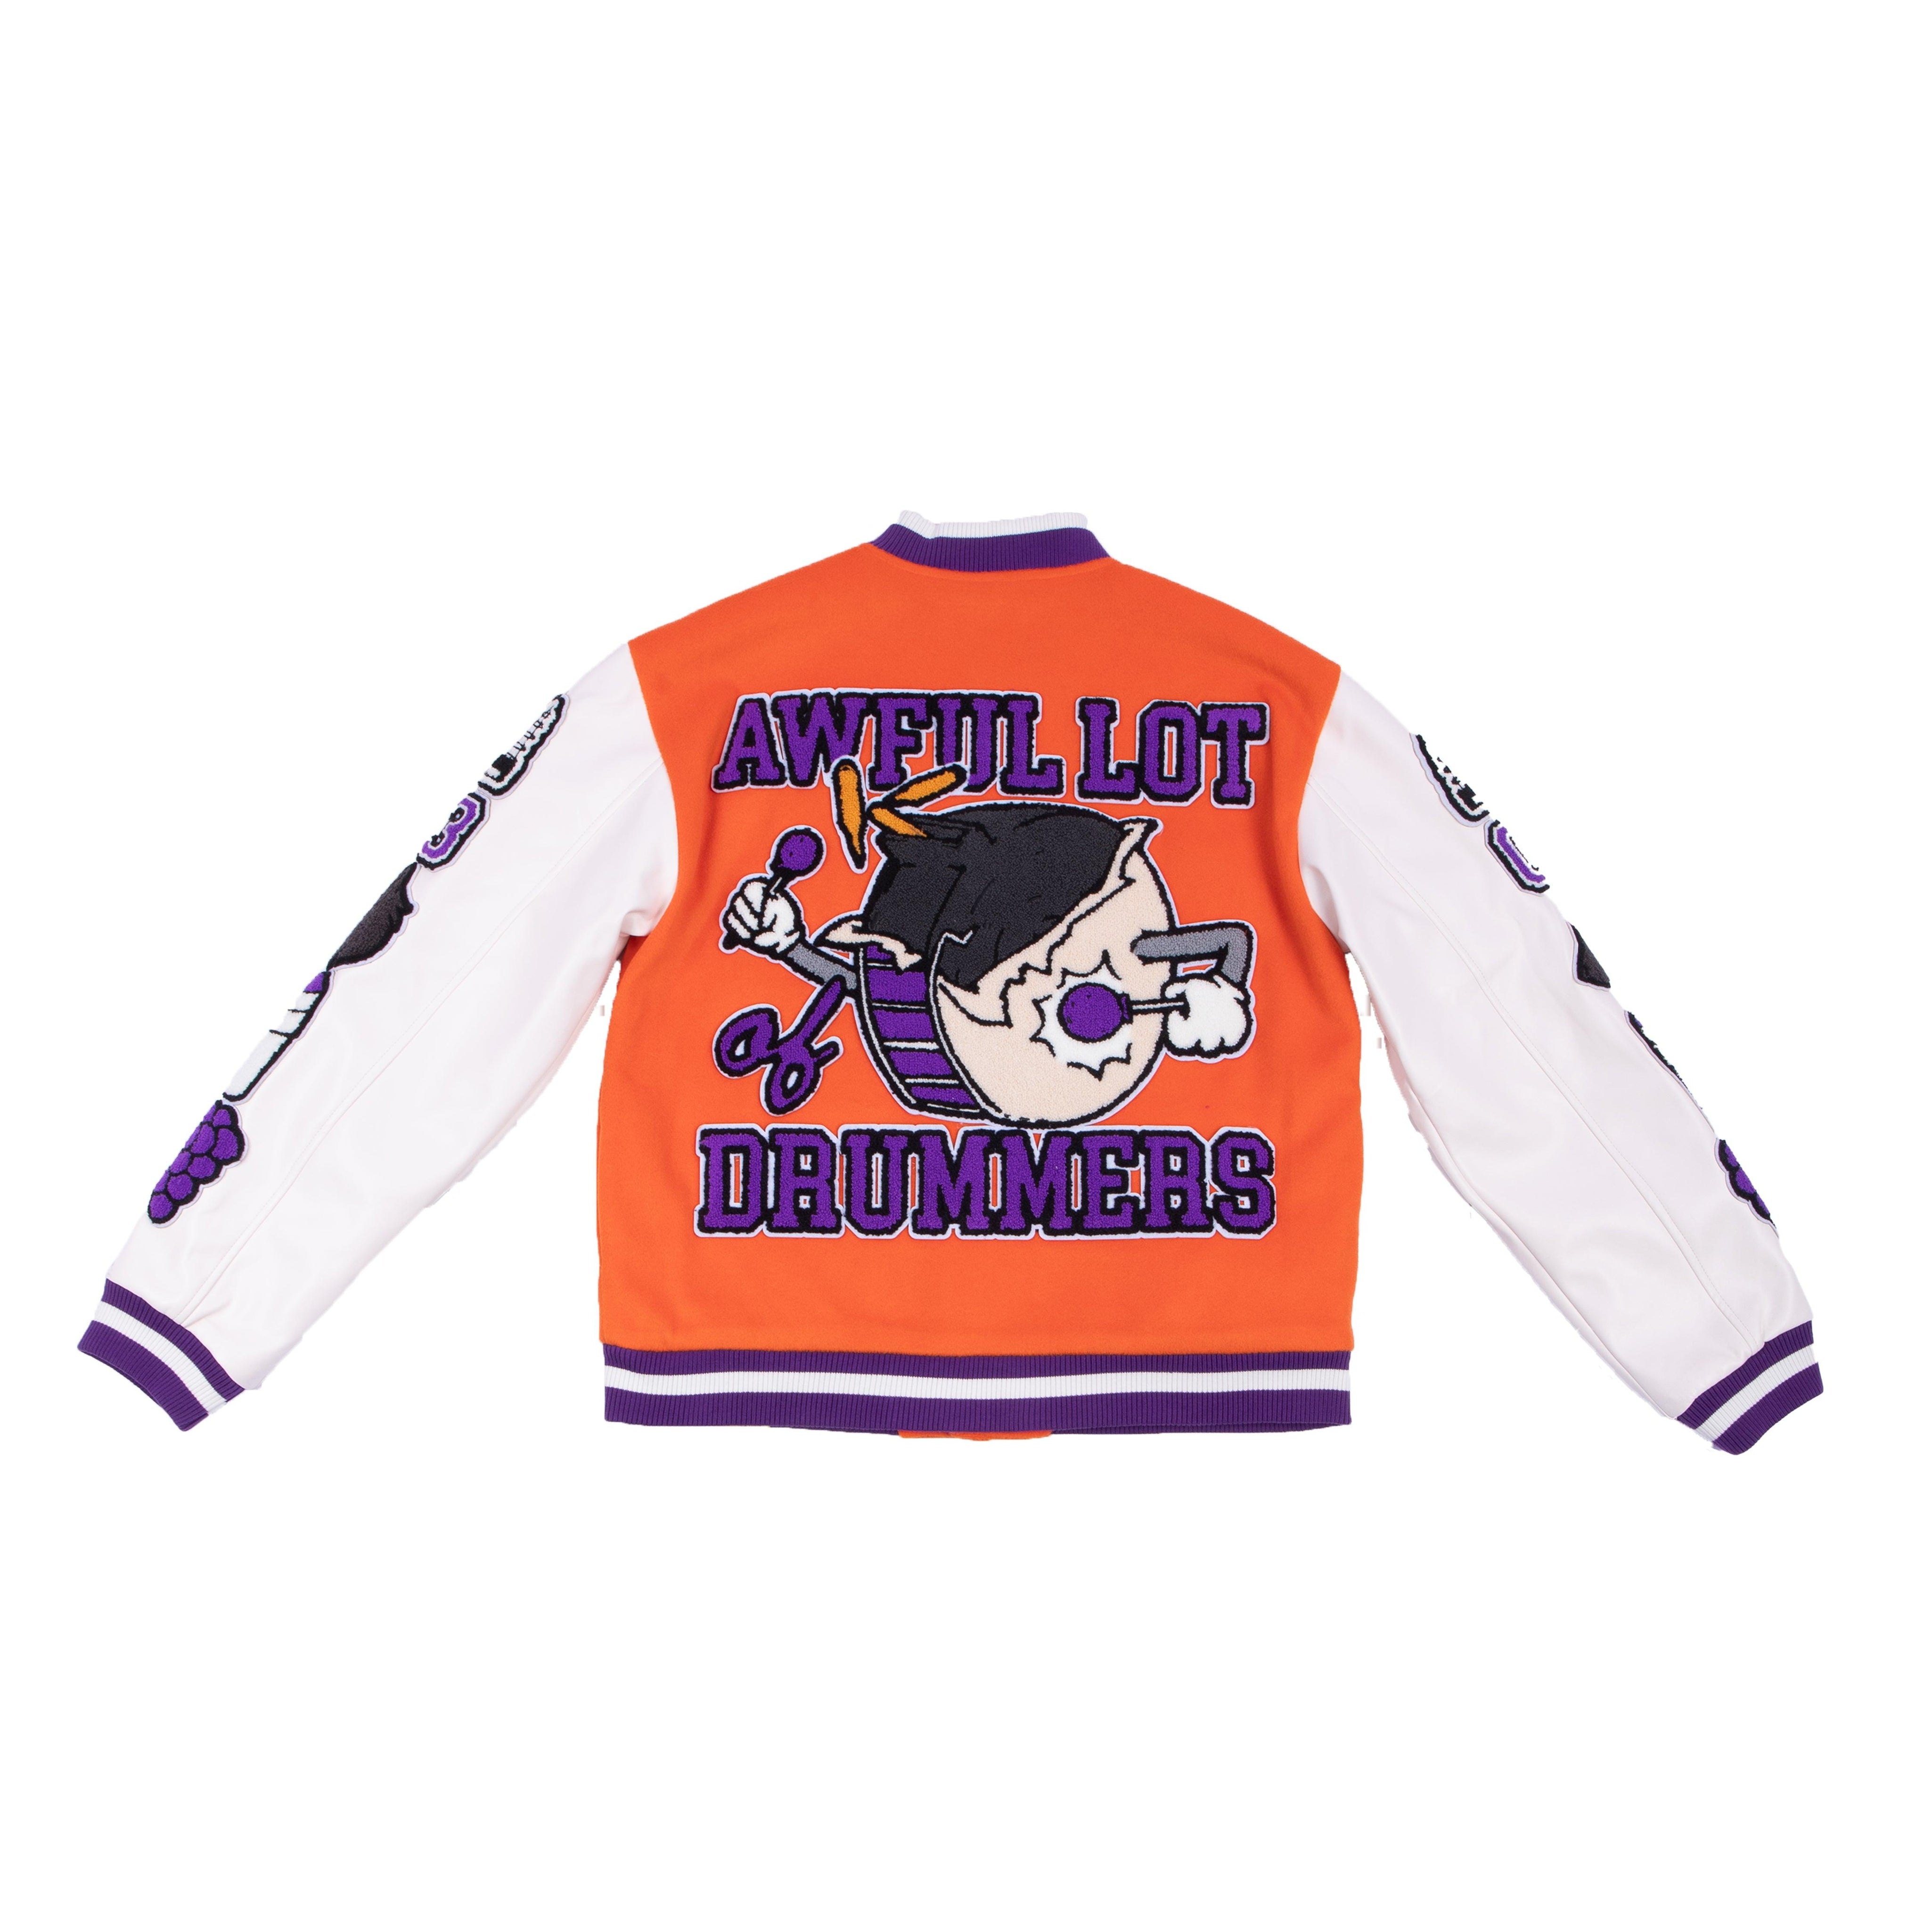 03 Greedo Letterman Jacket - THATS A AWFUL LOT OF...